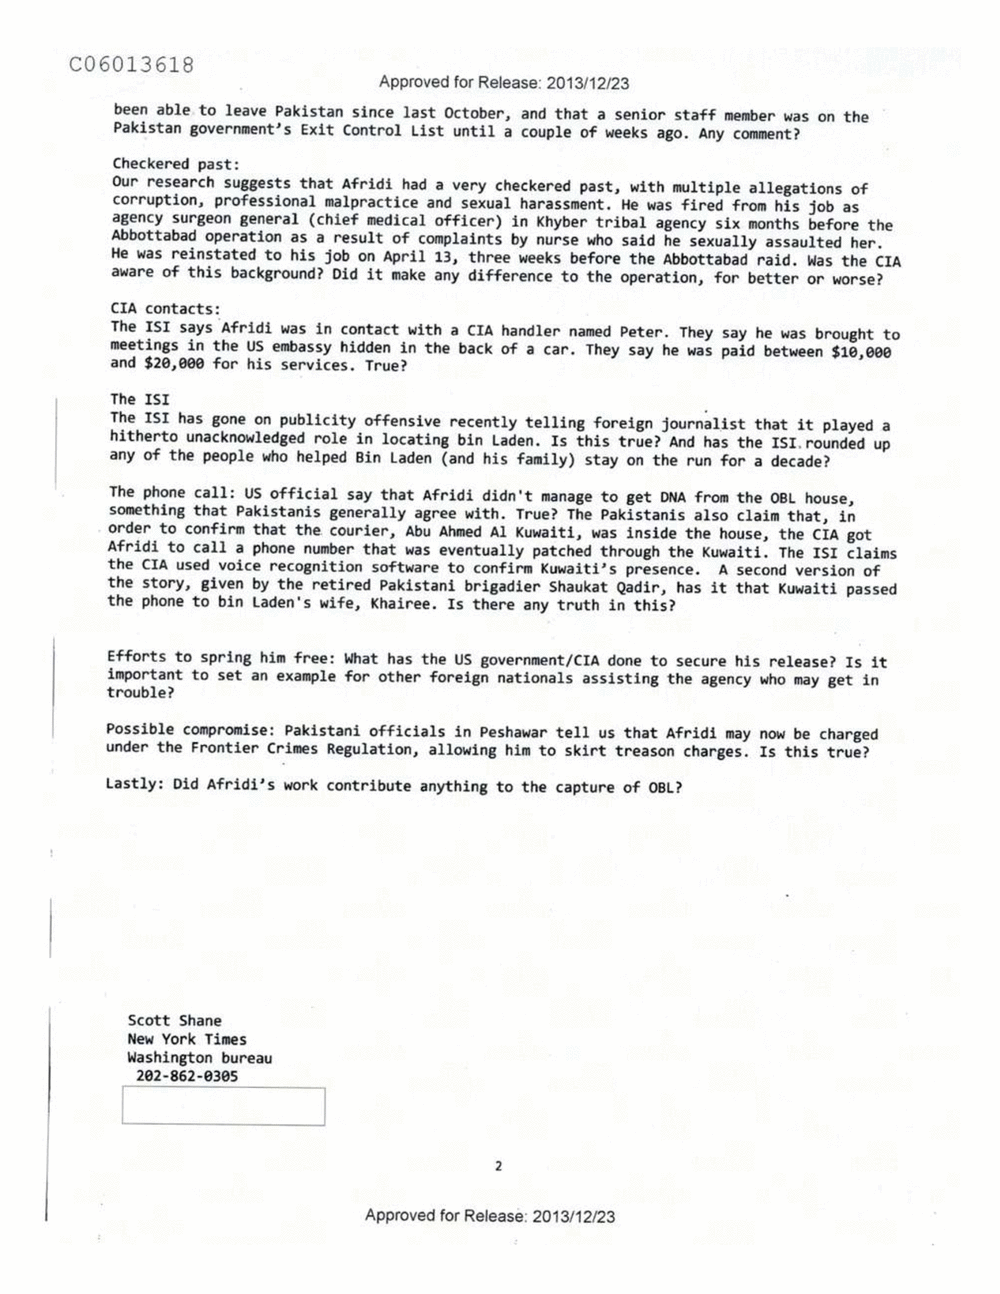 Page 449 from Email Correspondence Between Reporters and CIA Flacks